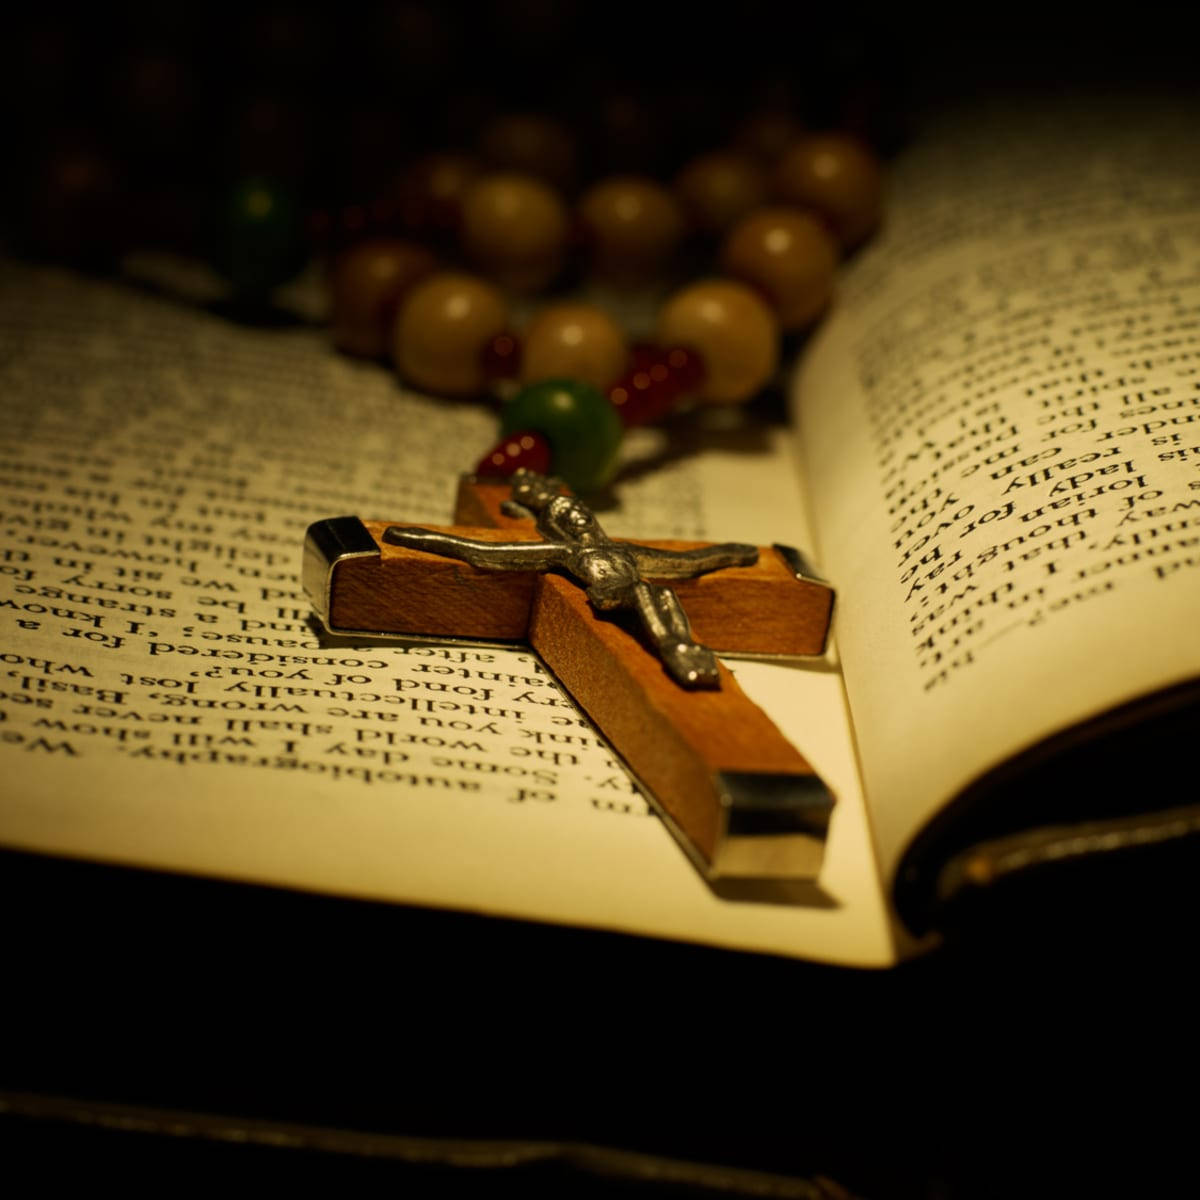 Rosary And The Bible In The Christianity Background